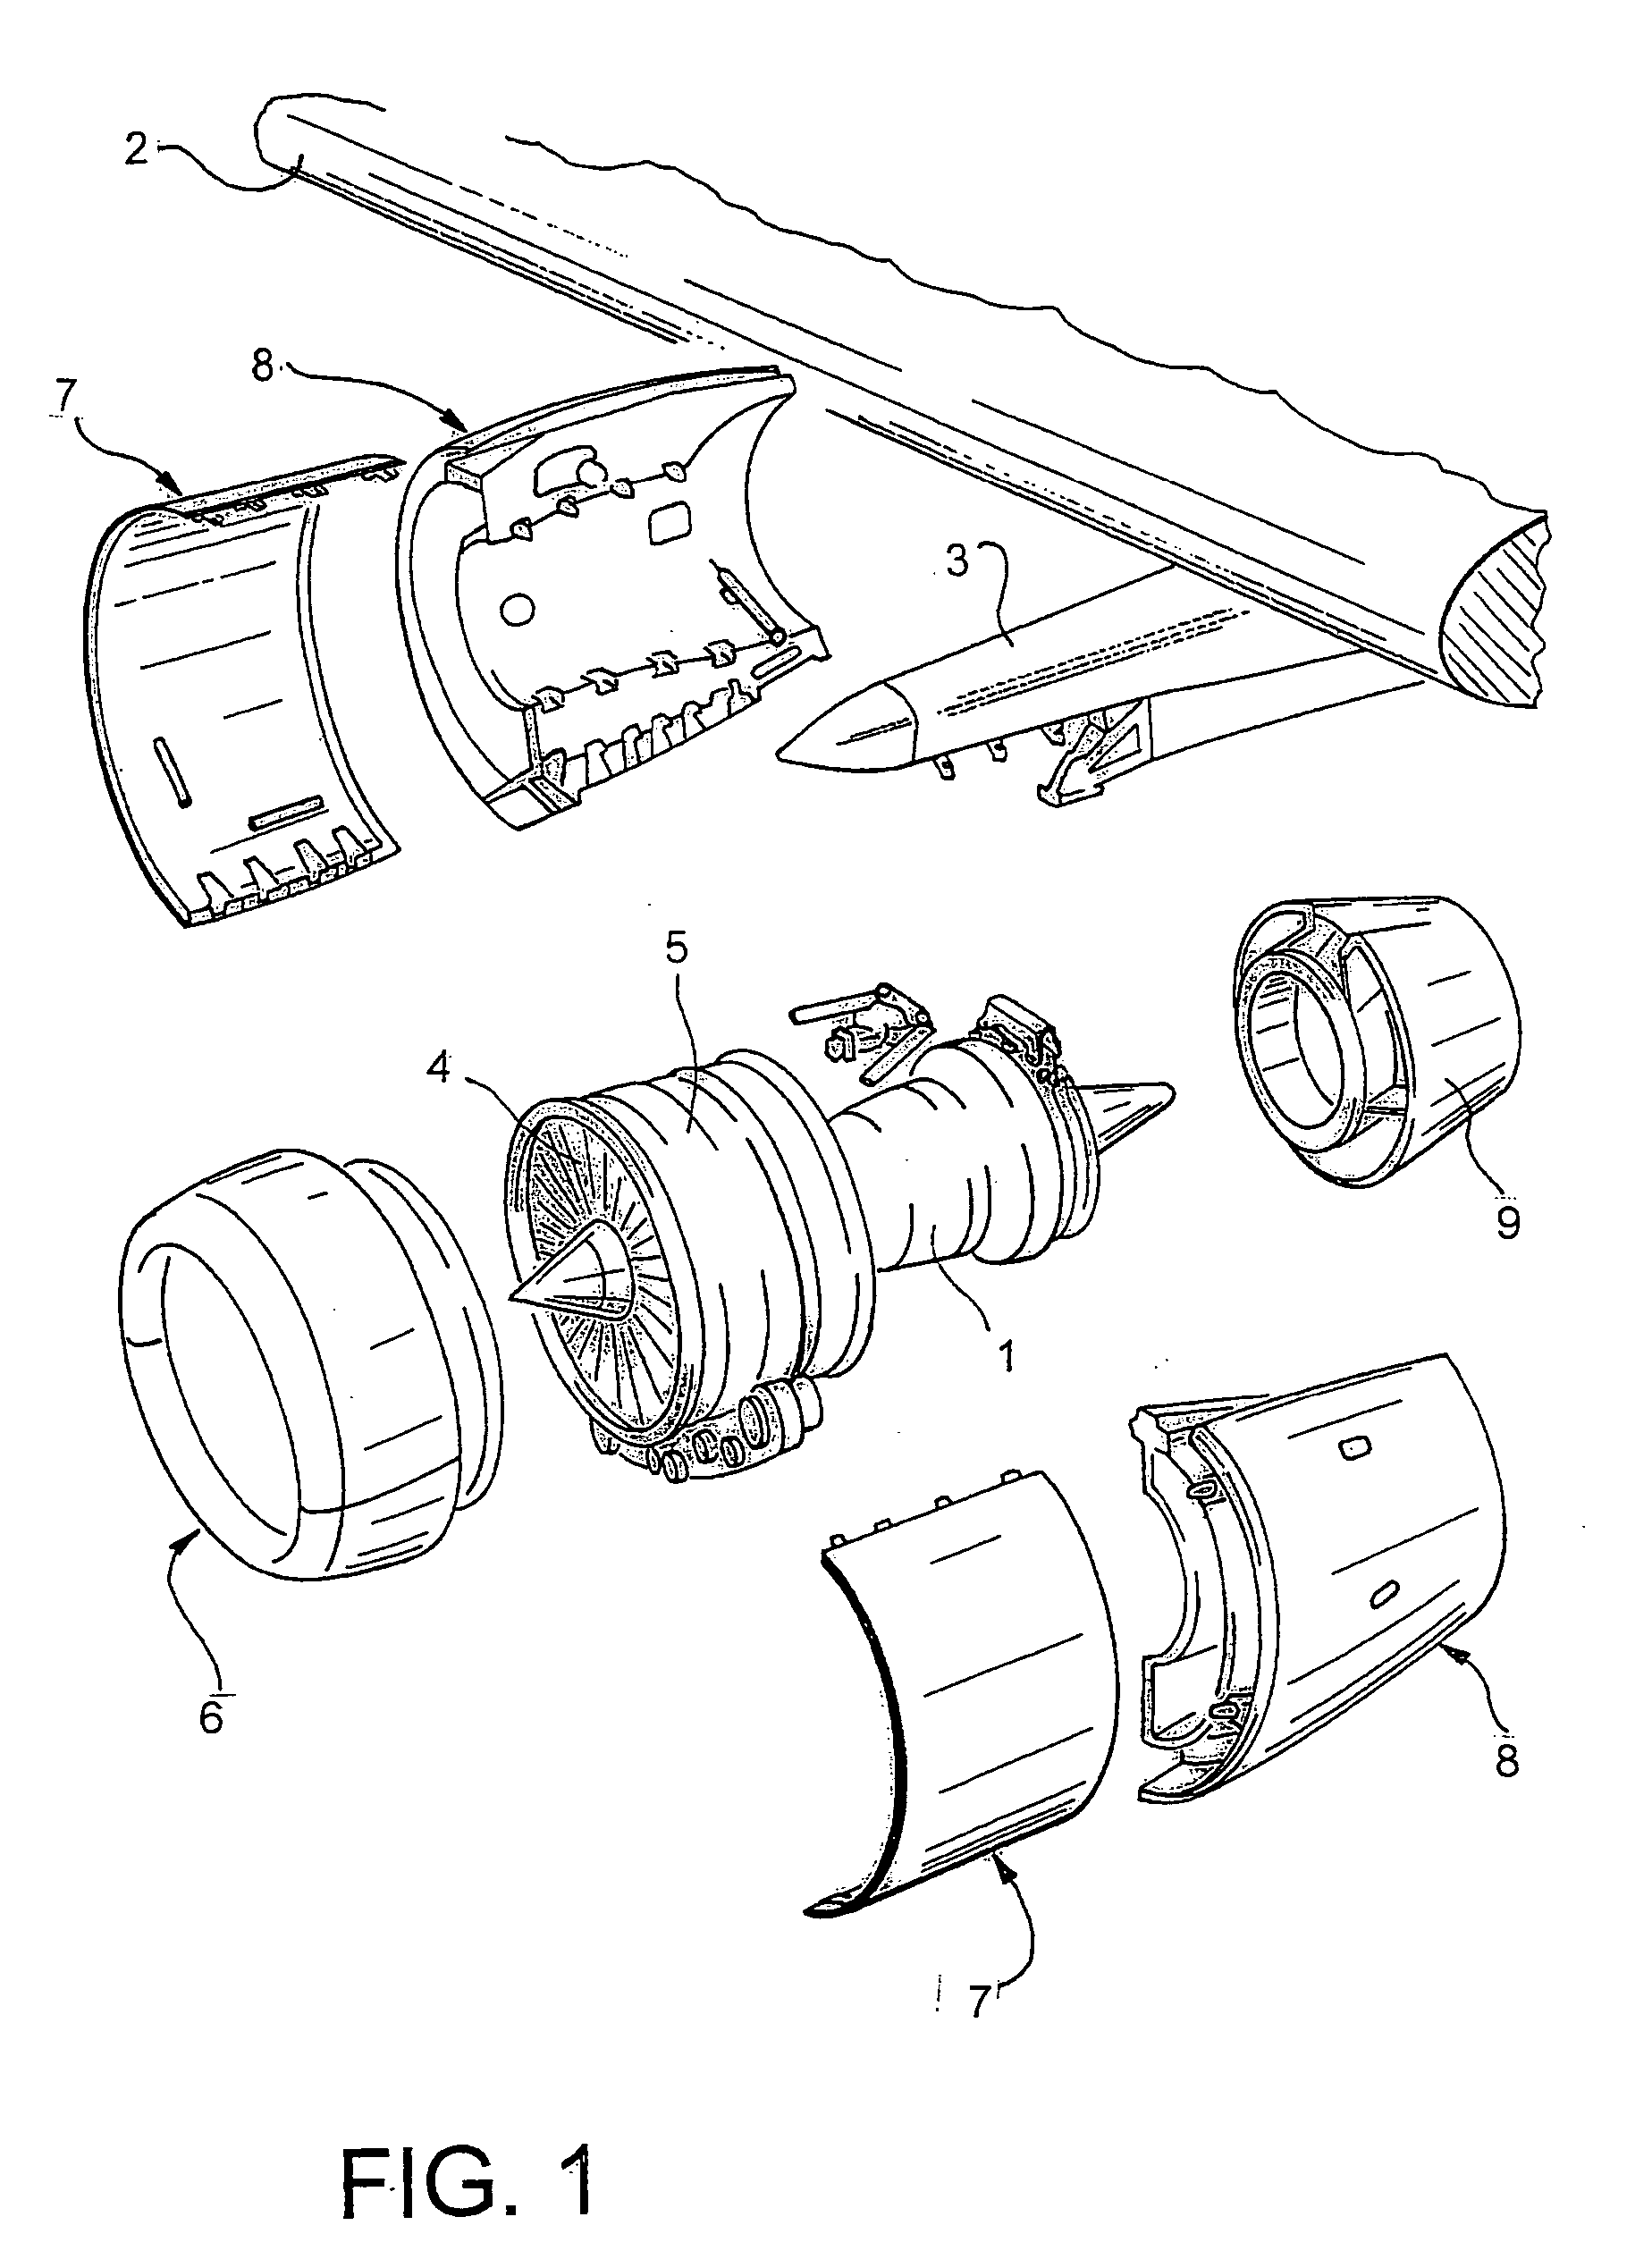 Aircraft engine in which there is a small clearance separating the fan cowls and the thrust inverter cowls